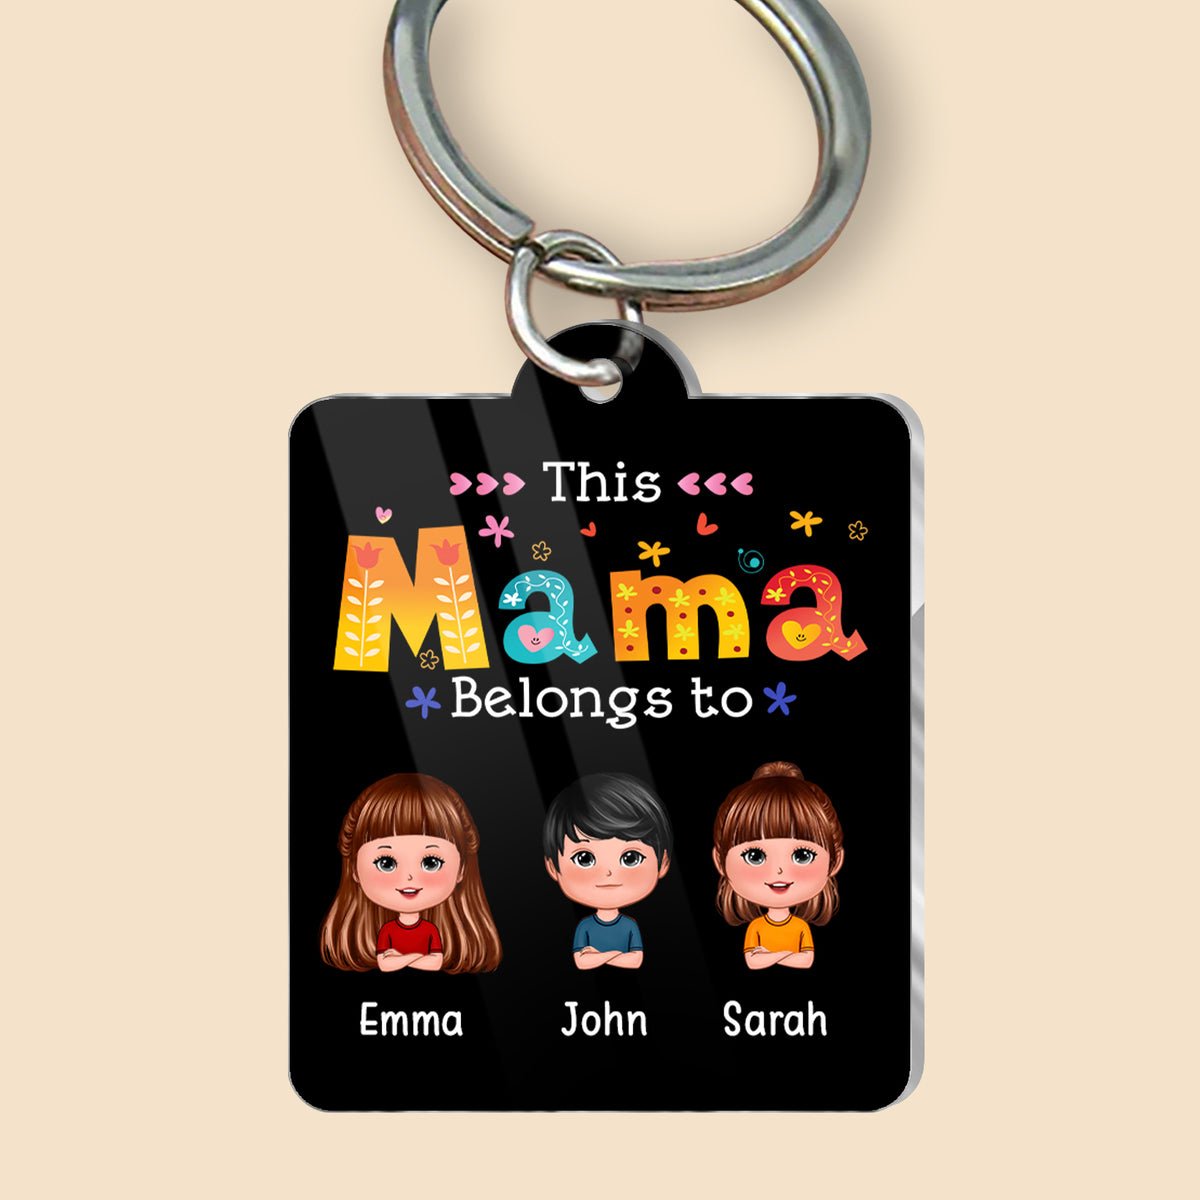 This Mama Belongs To - Personalized Acrylic Keychain - Best Gift For Mother, Grandma - Giftago